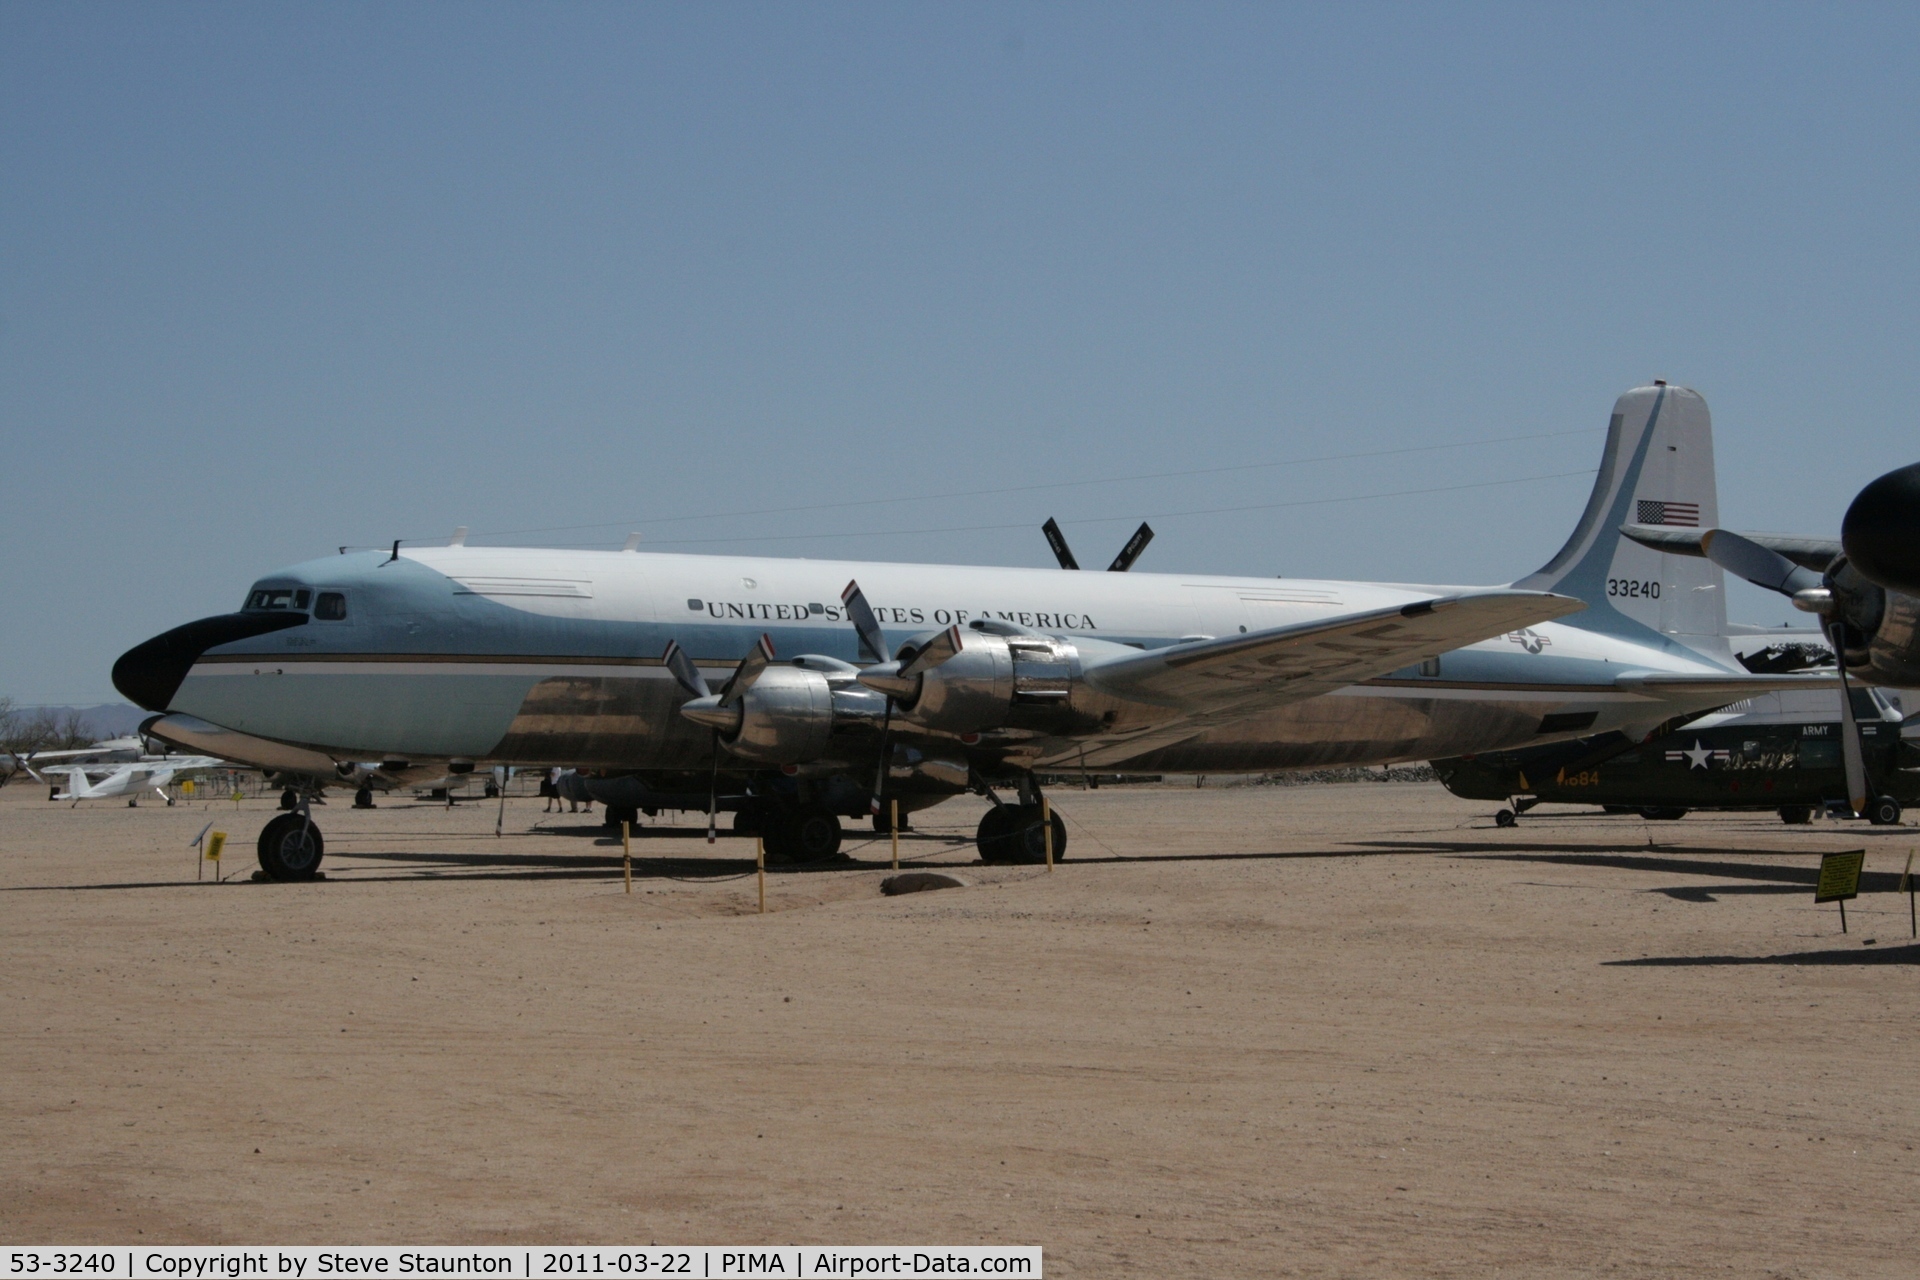 53-3240, 1954 Douglas VC-118A Liftmaster C/N 44611, Taken at Pima Air and Space Museum, in March 2011 whilst on an Aeroprint Aviation tour